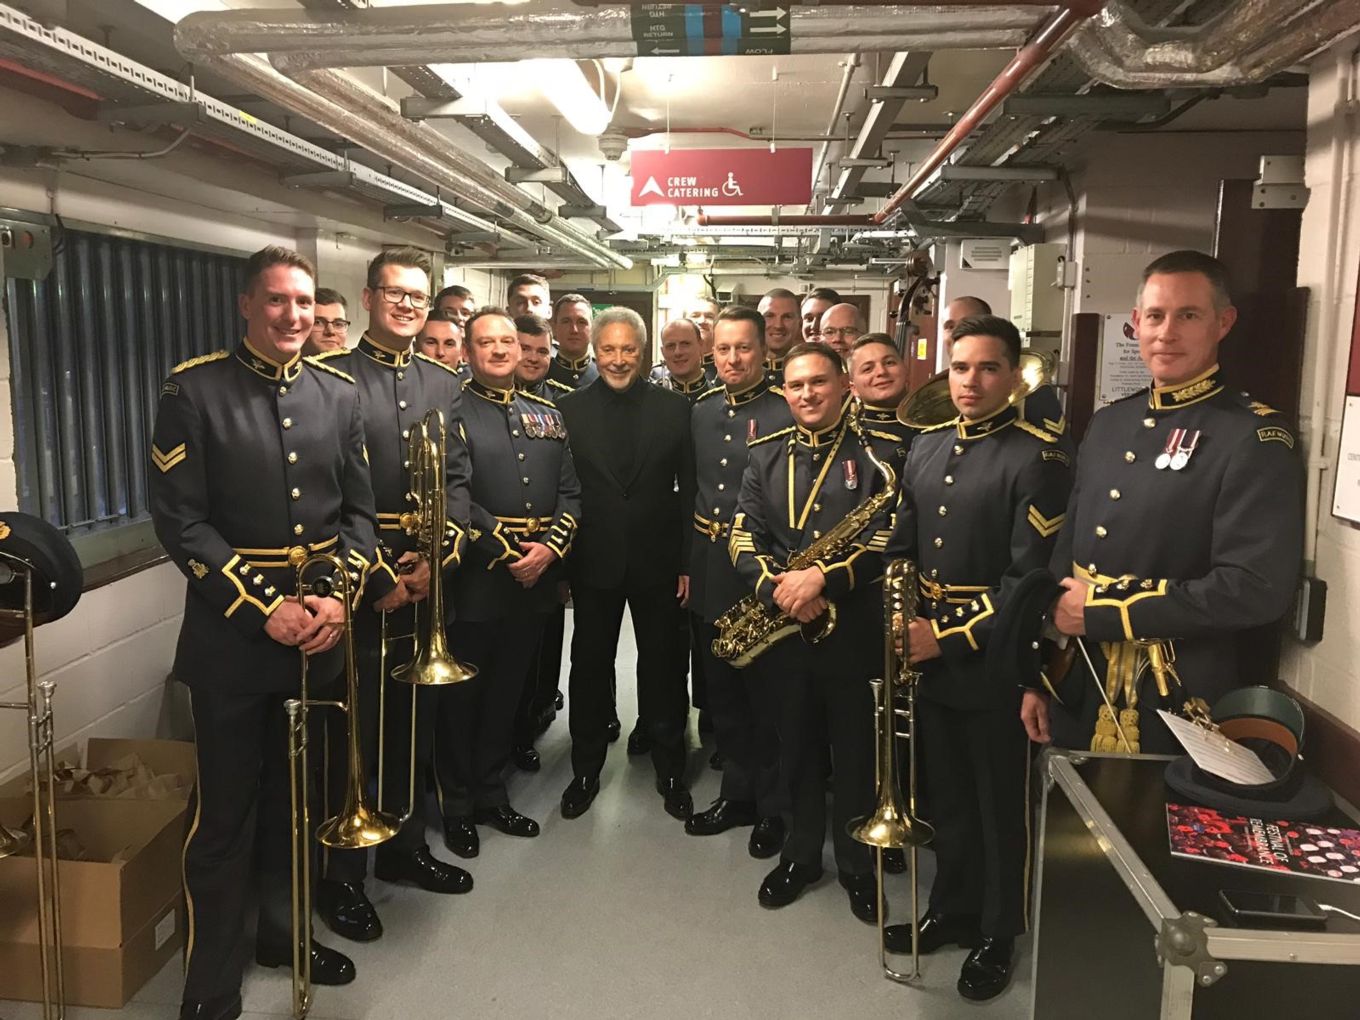 Sir Tom Jones pictured with the RAF Squadronaires backstage.